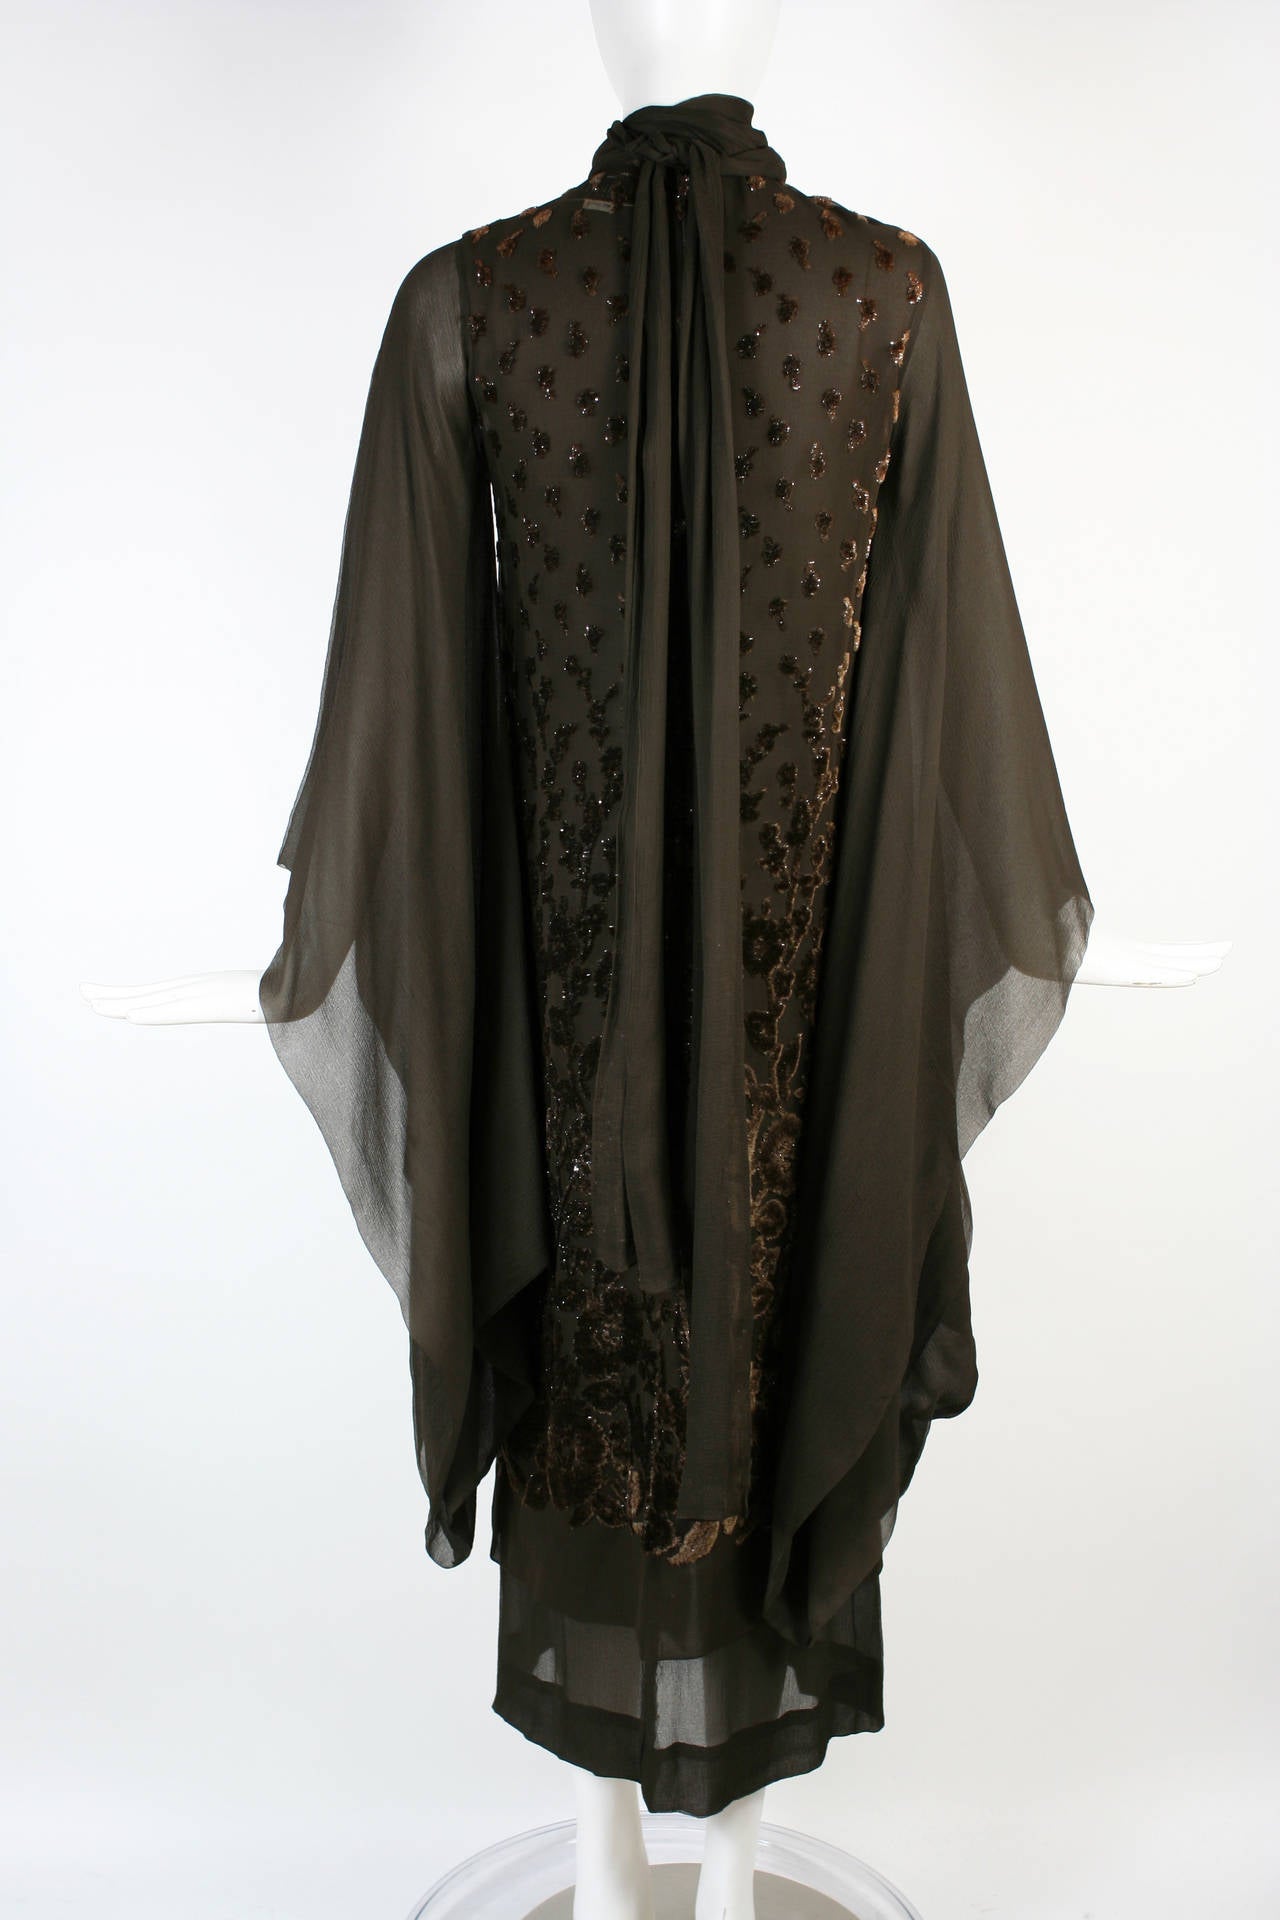 Christian Dior 1969 Haute Couture Silk Gown Kimono Sleeves- In Met Museum In Excellent Condition For Sale In New York, NY